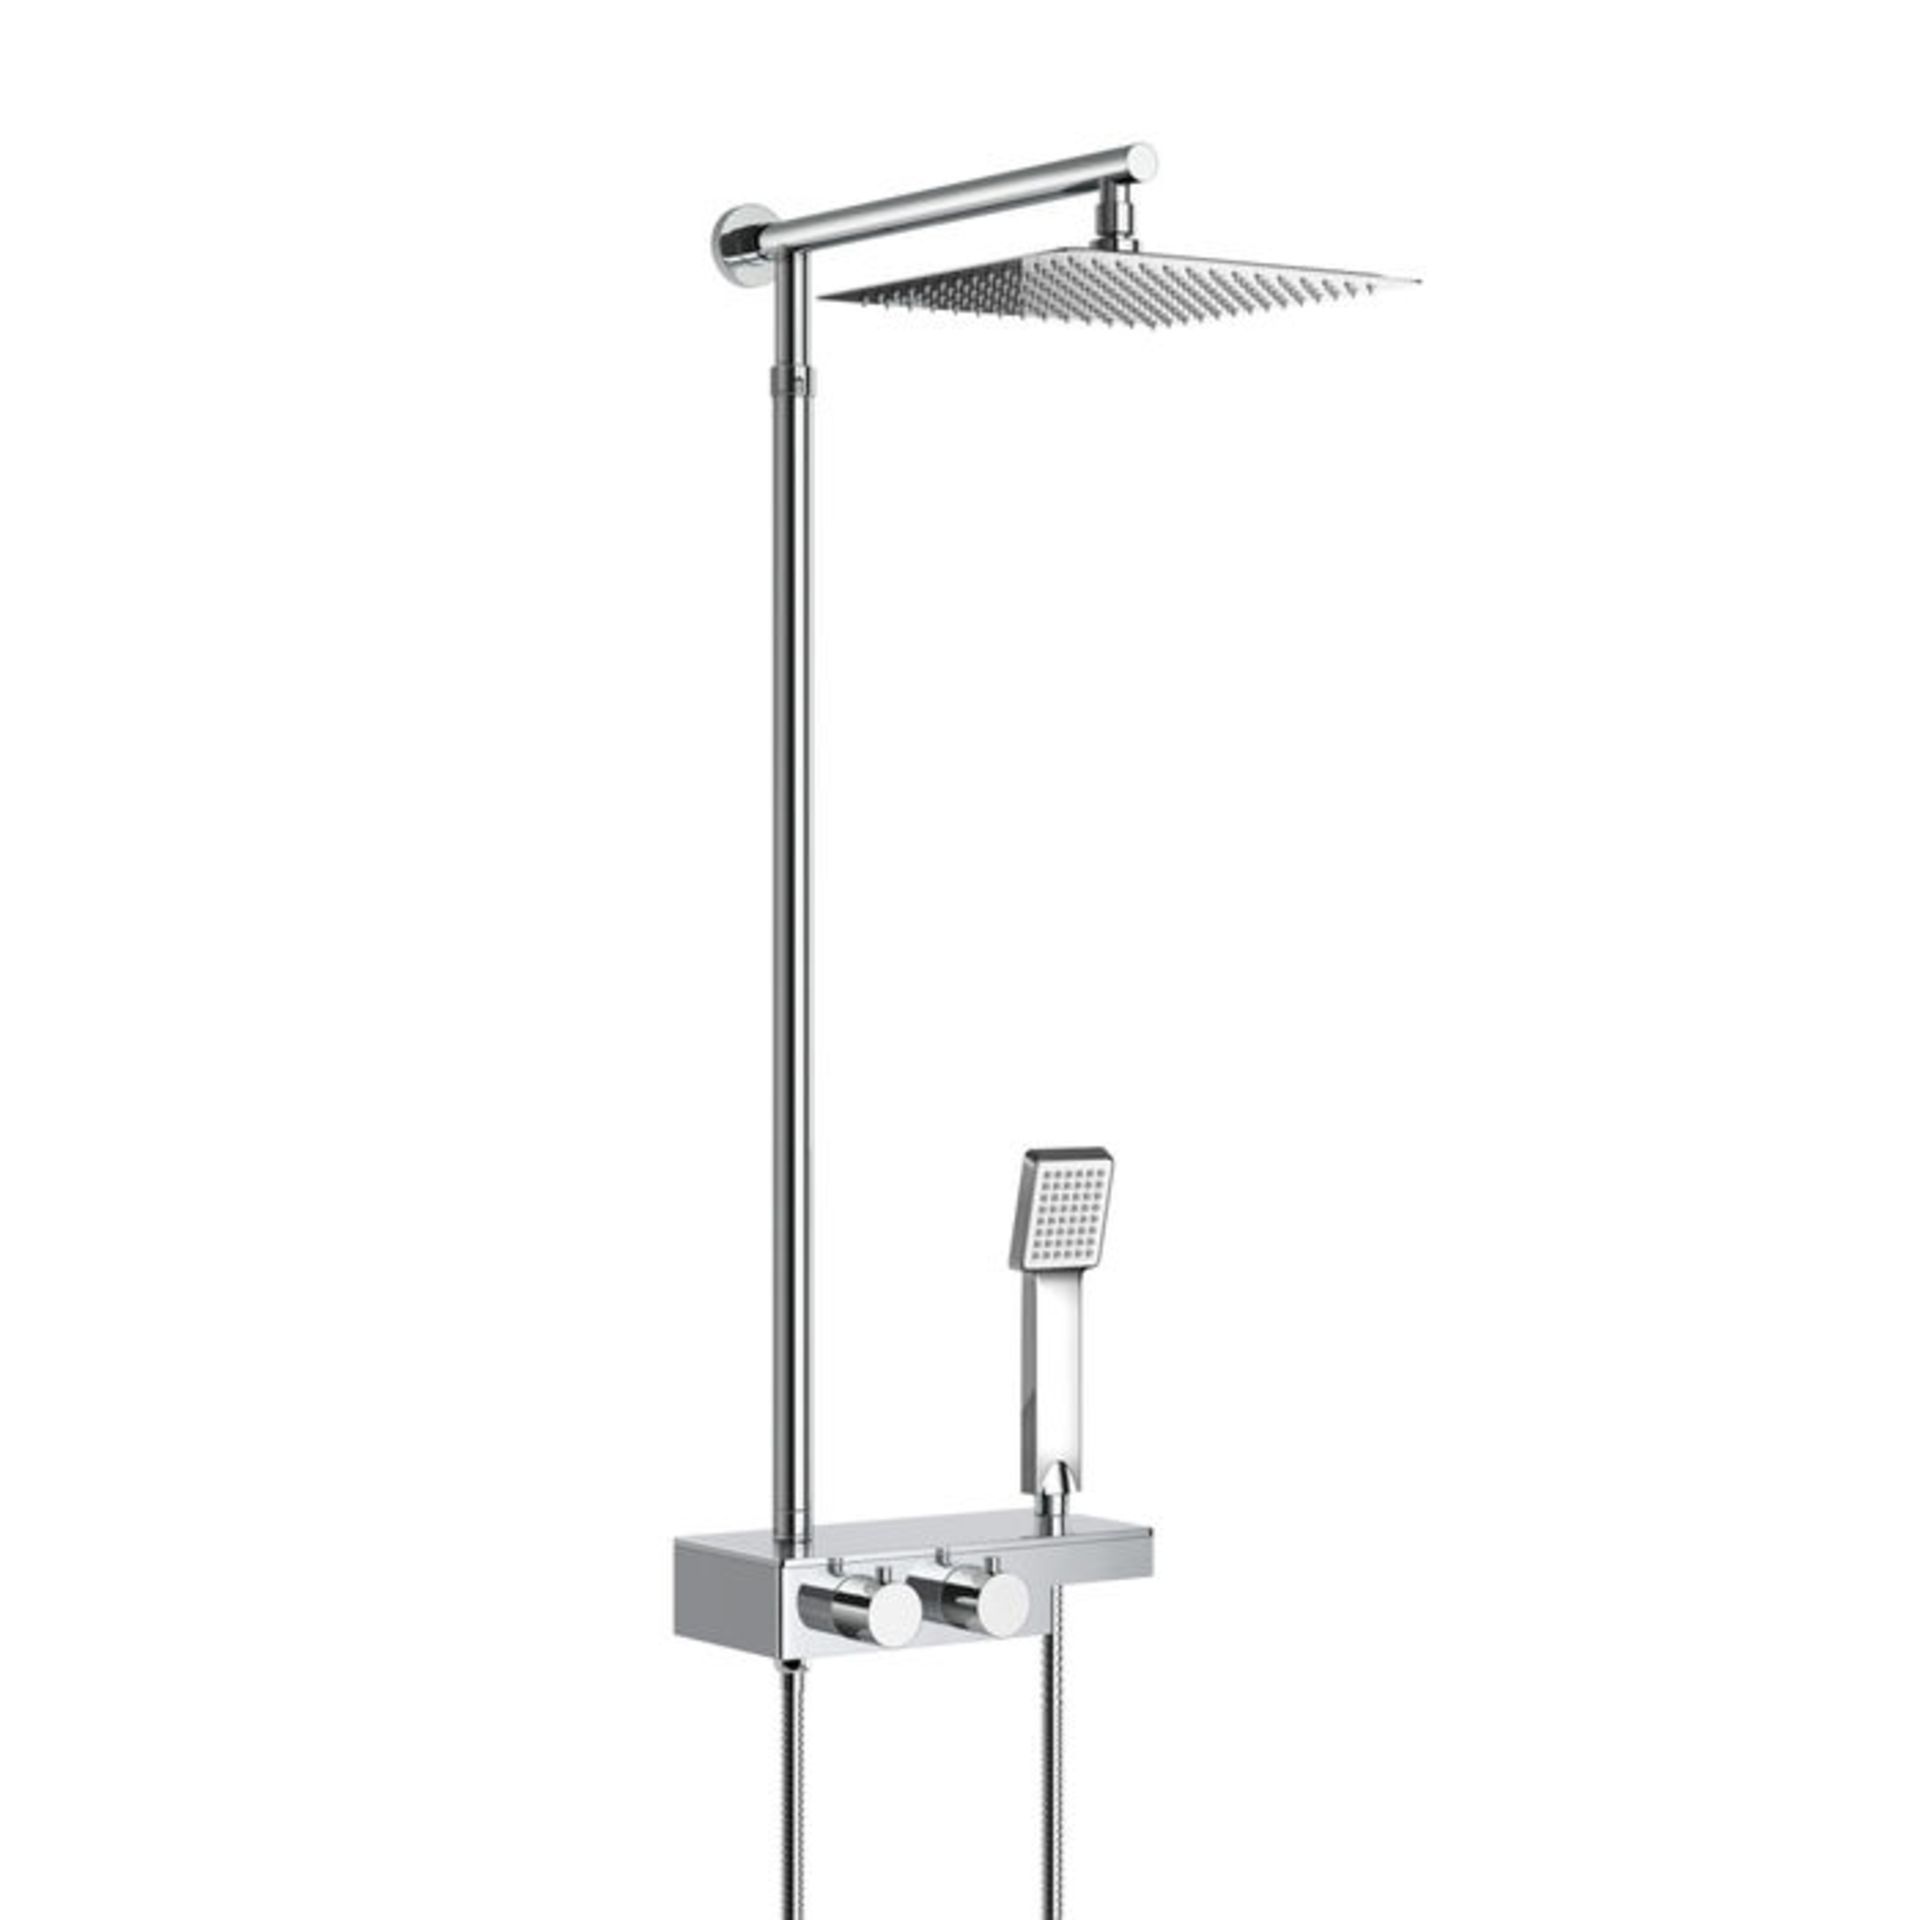 (CT228) Square Exposed Thermostatic Shower Shelf - Image 5 of 8